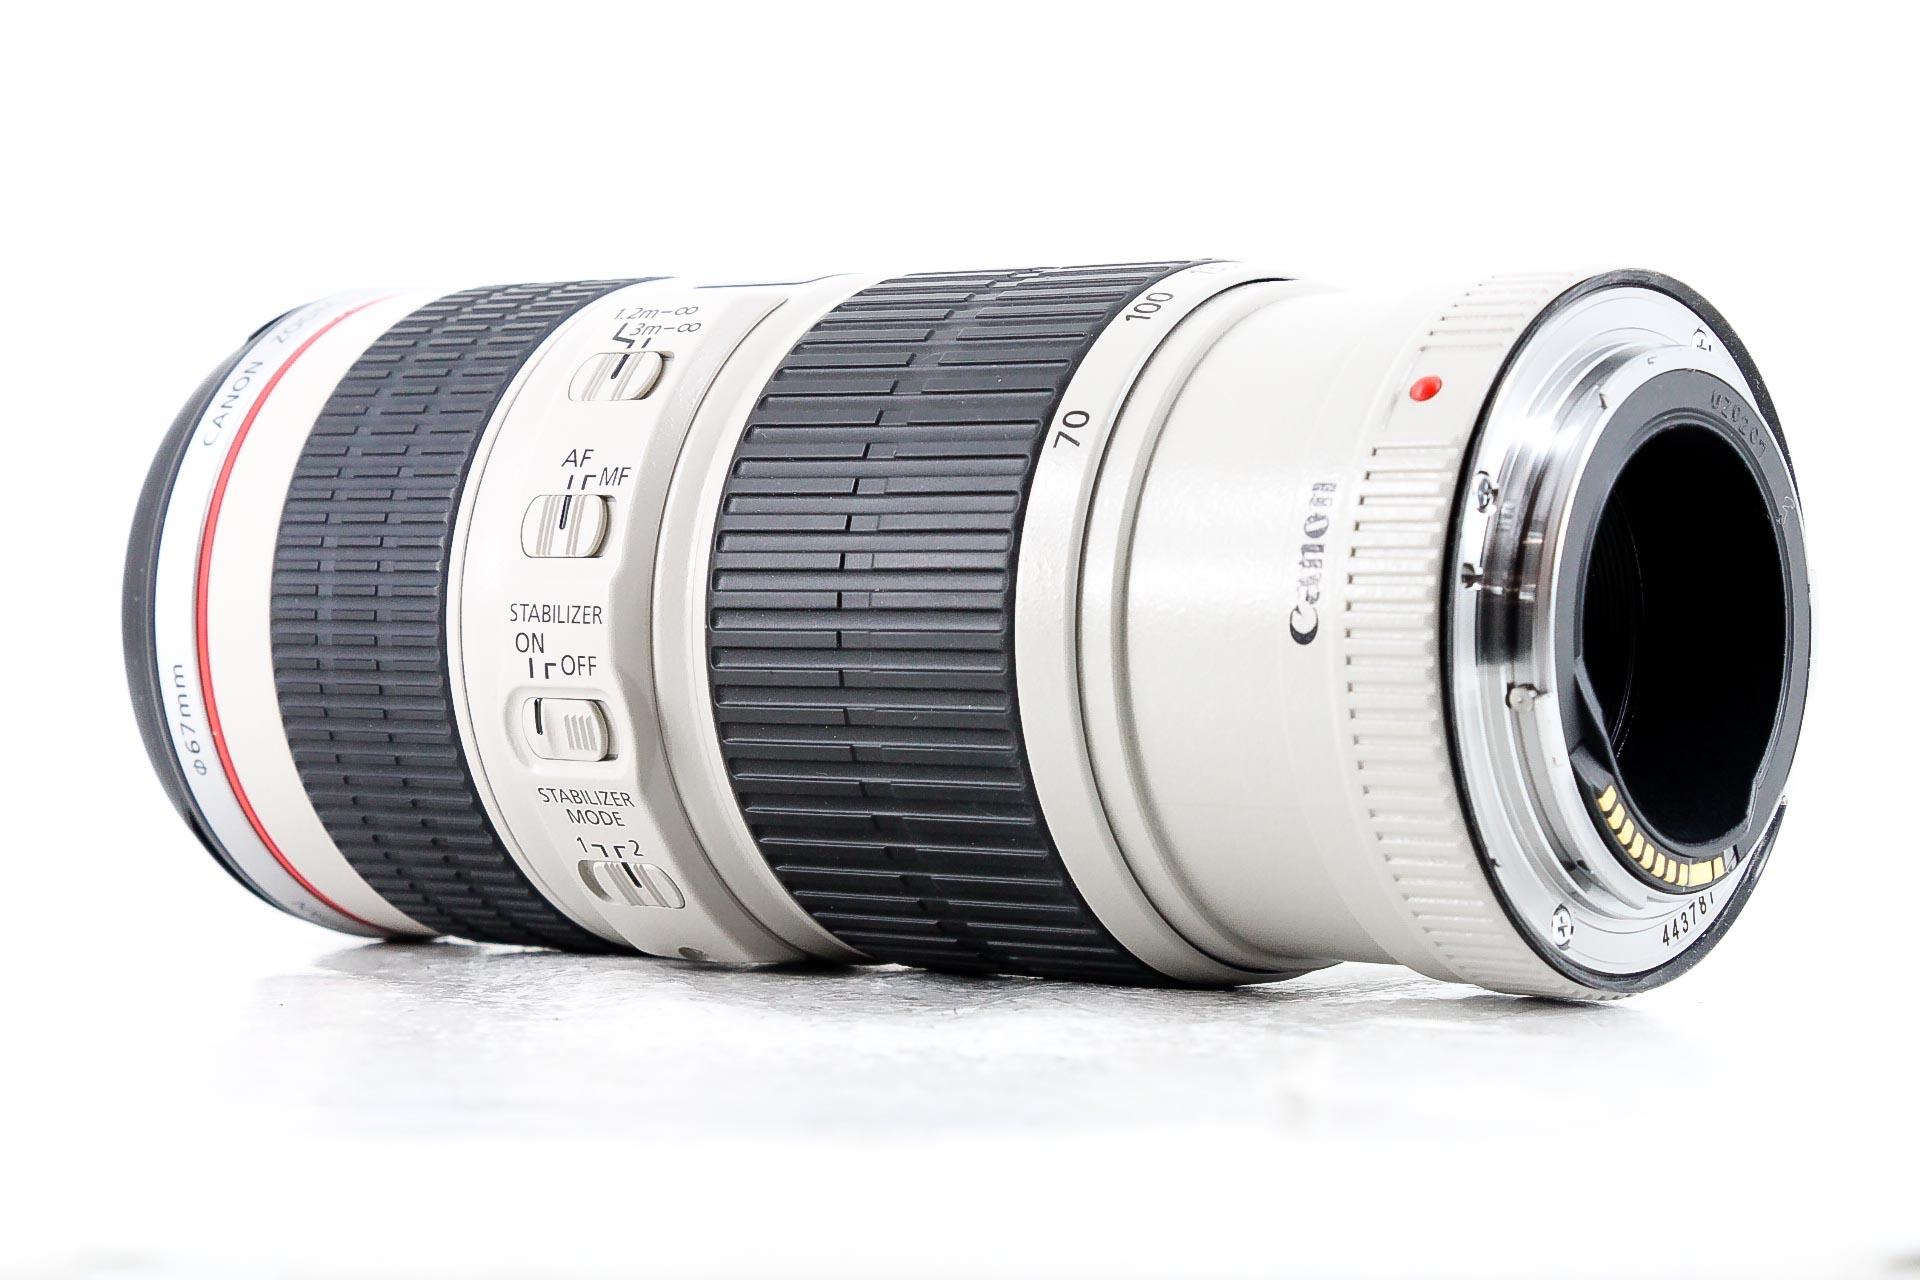 Canon EF 70-200mm F/4 L IS USM Lens - Lenses and Cameras